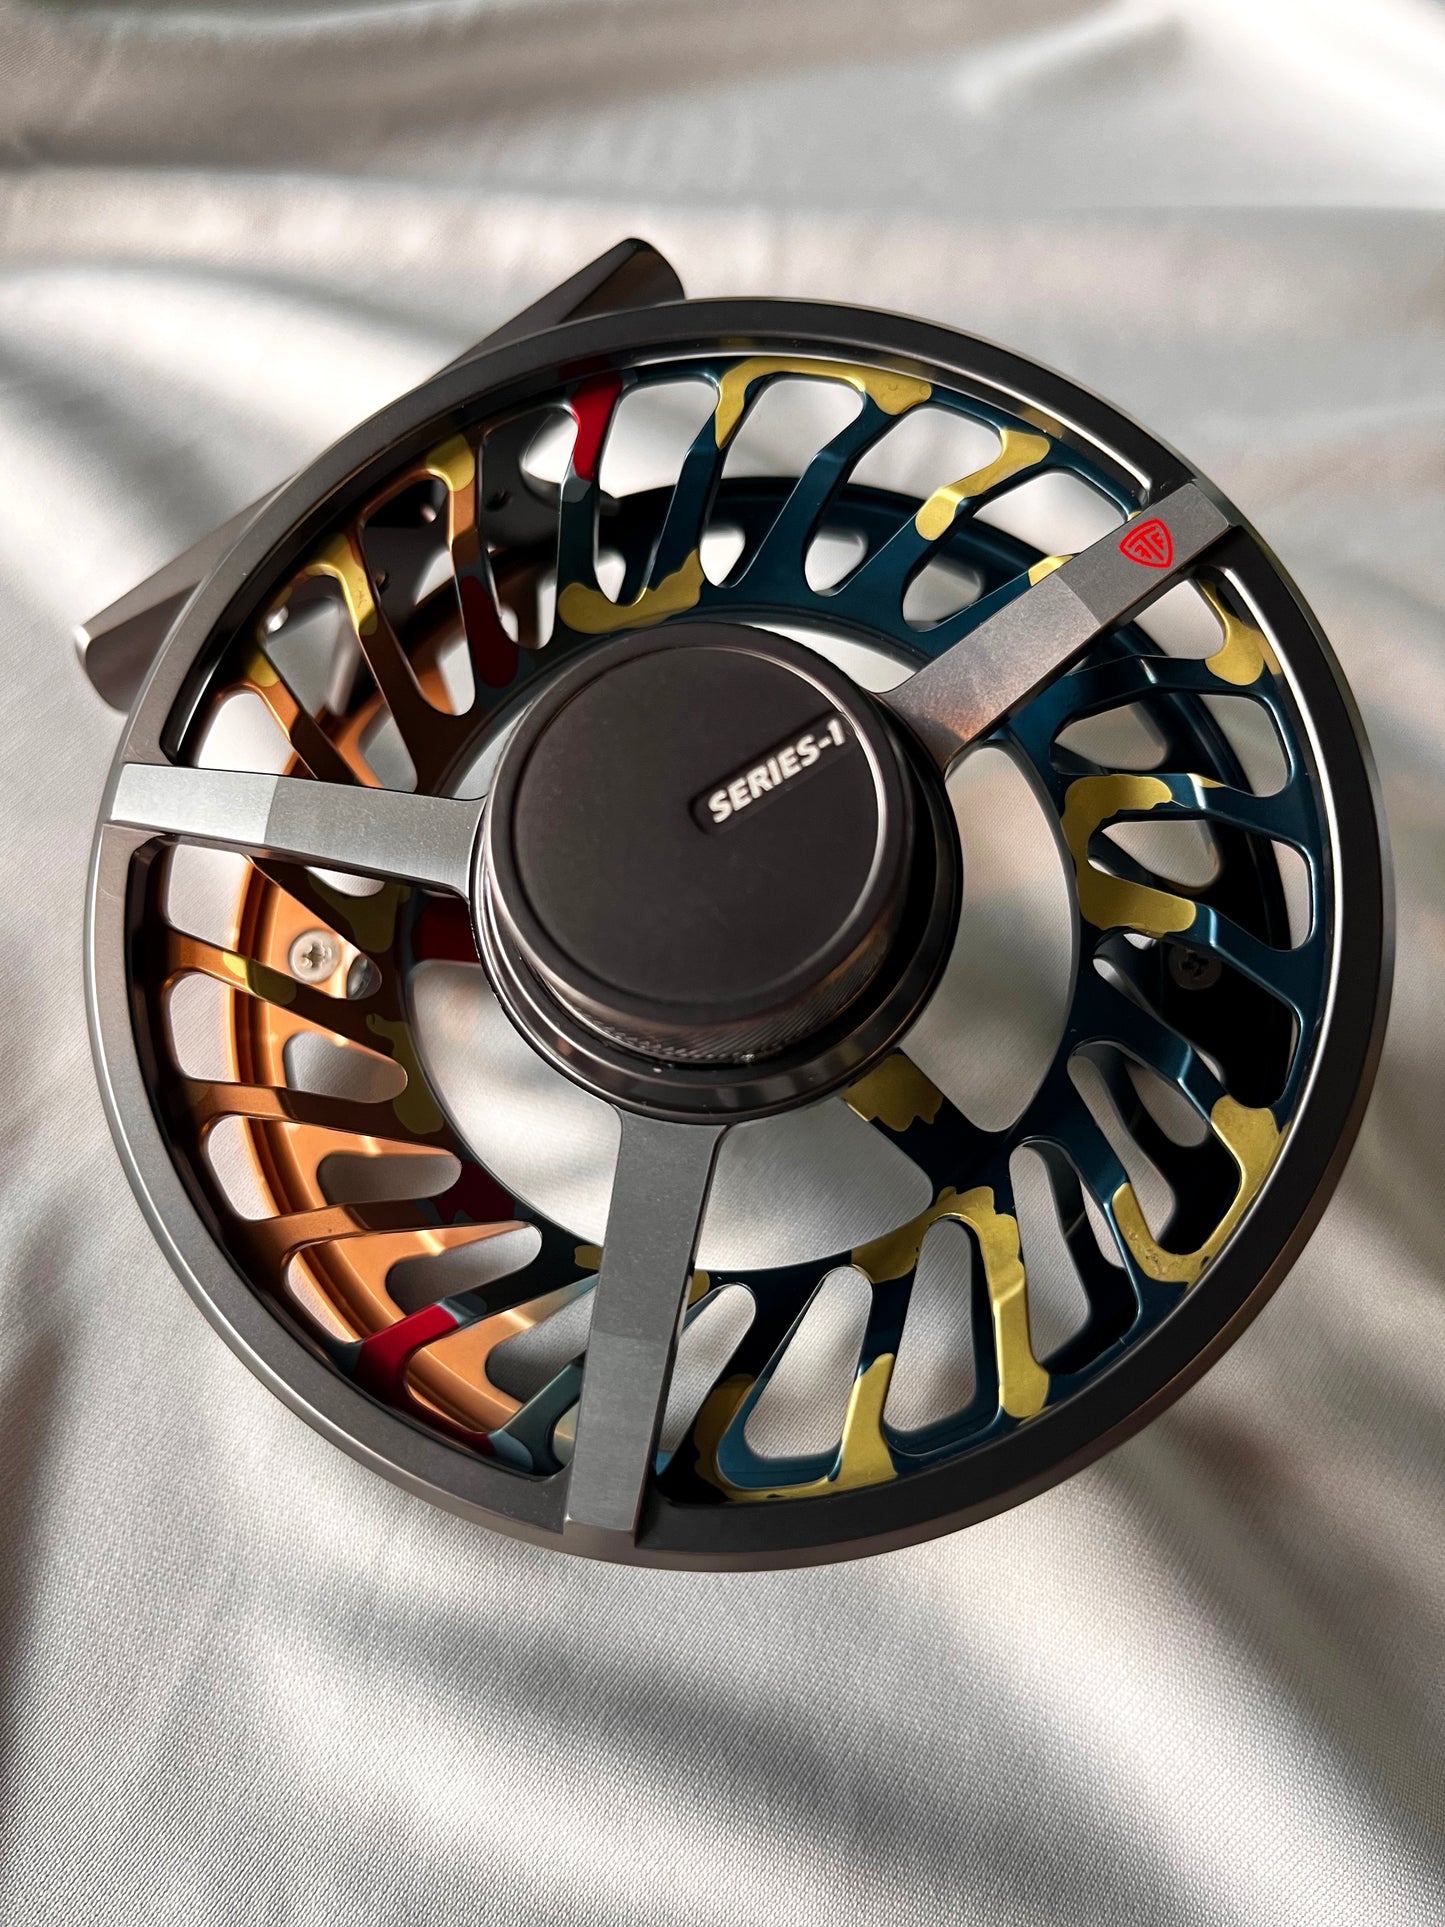 Taylor Series 1 Reel (SALE) WAS: $450 NOW: $300